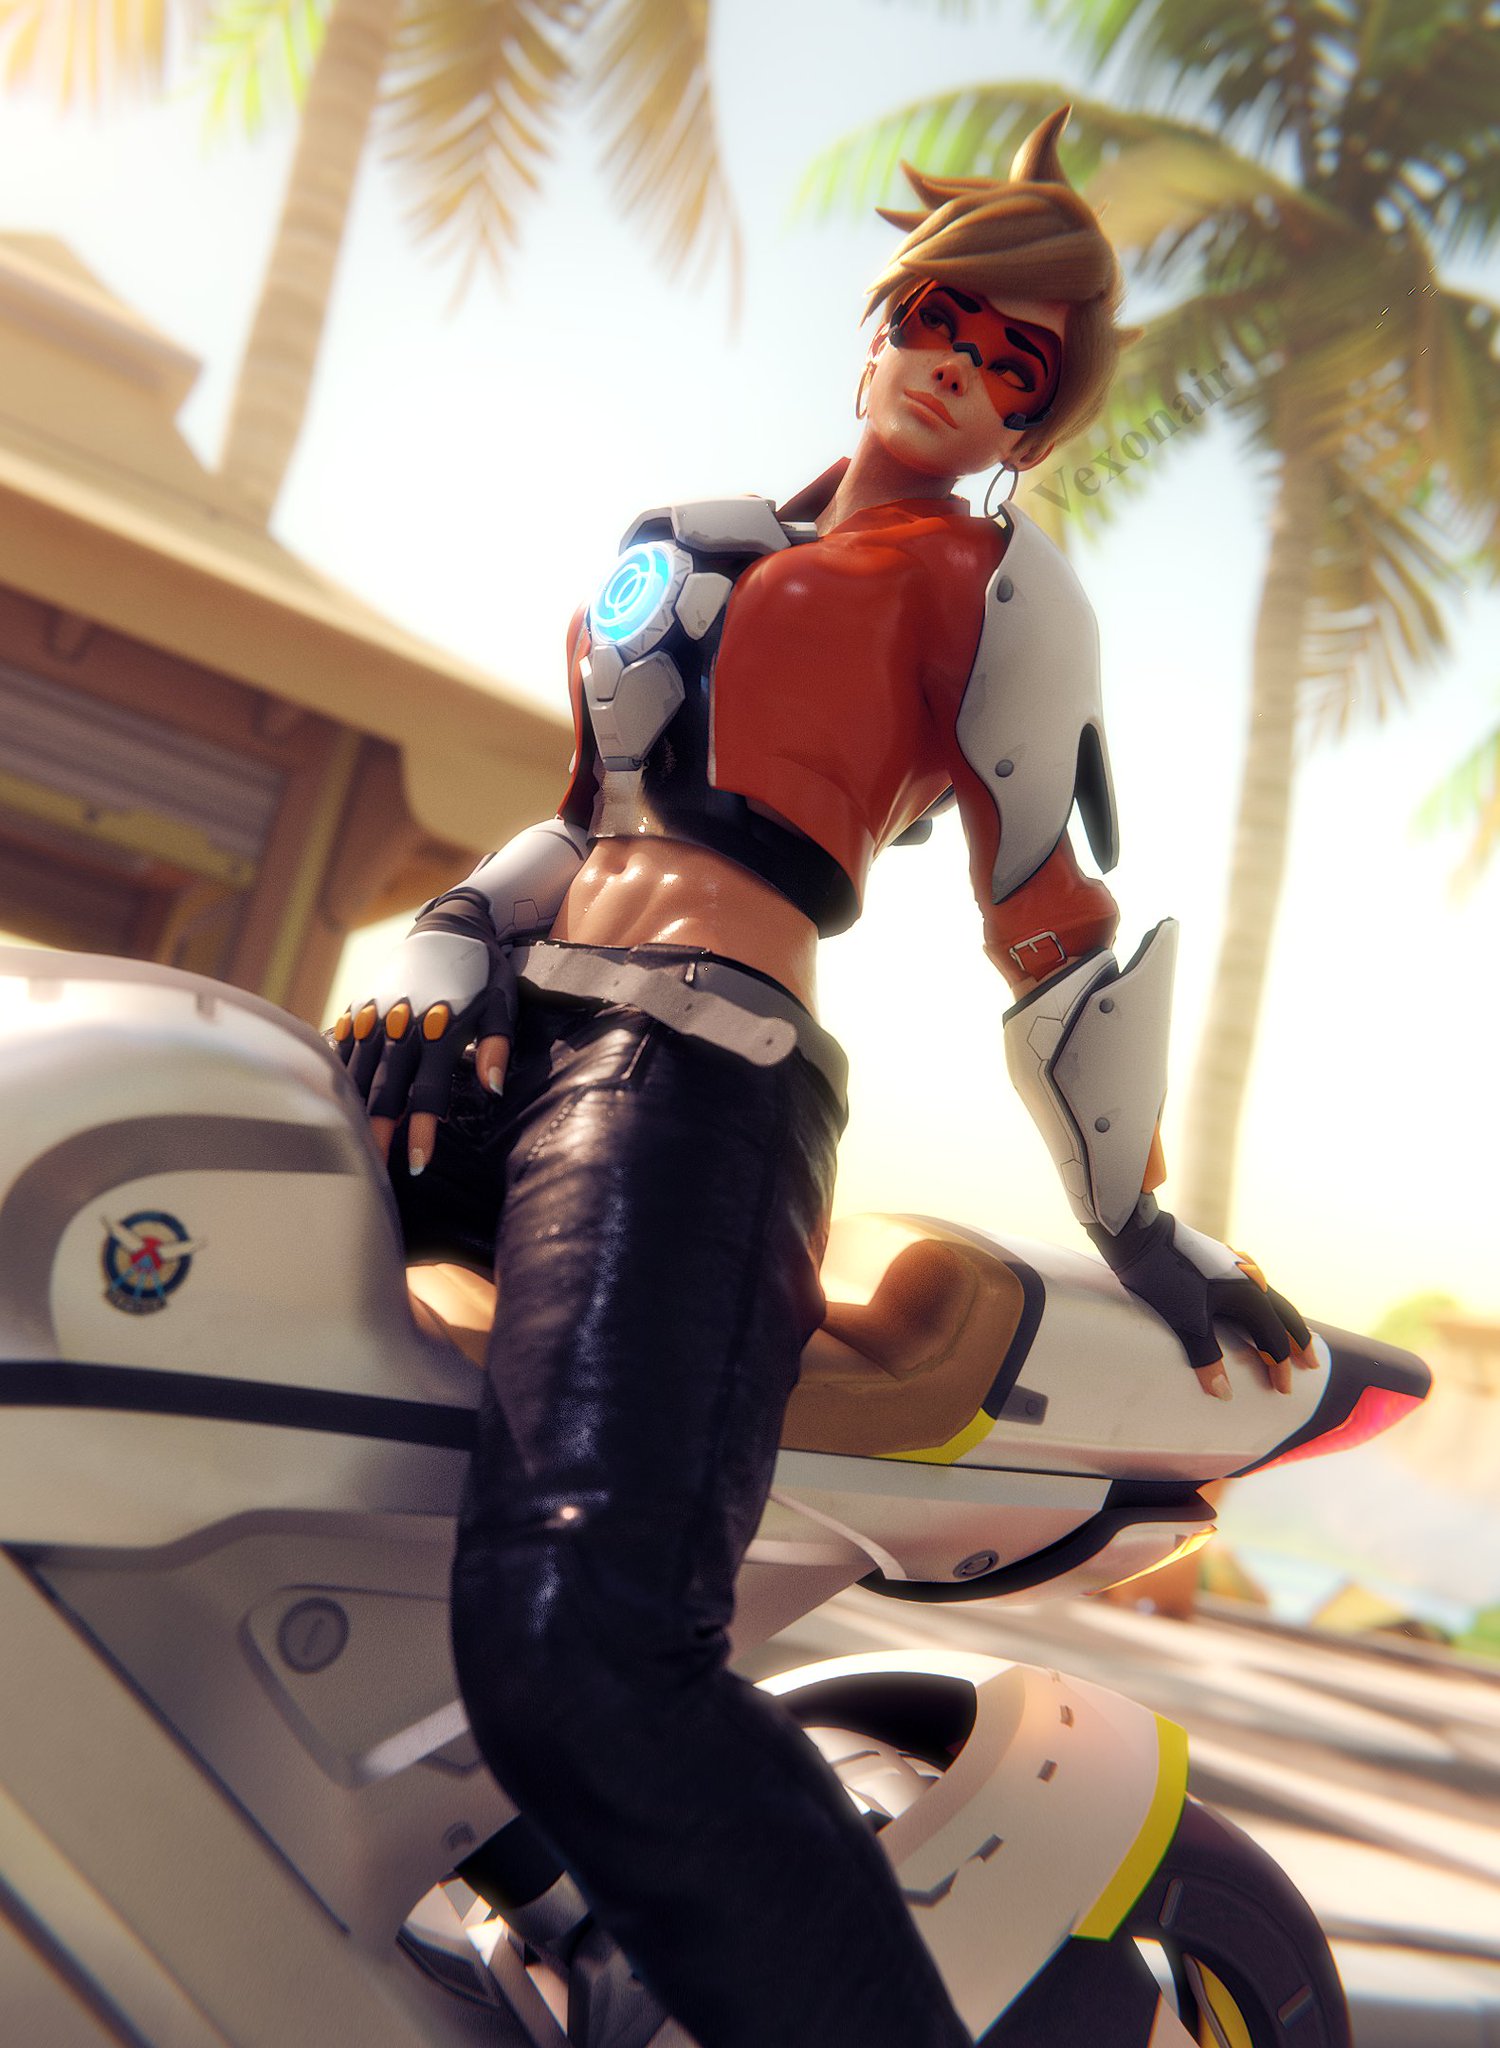 Overwatch's new Storm Rising trailer features Tracer on a bike